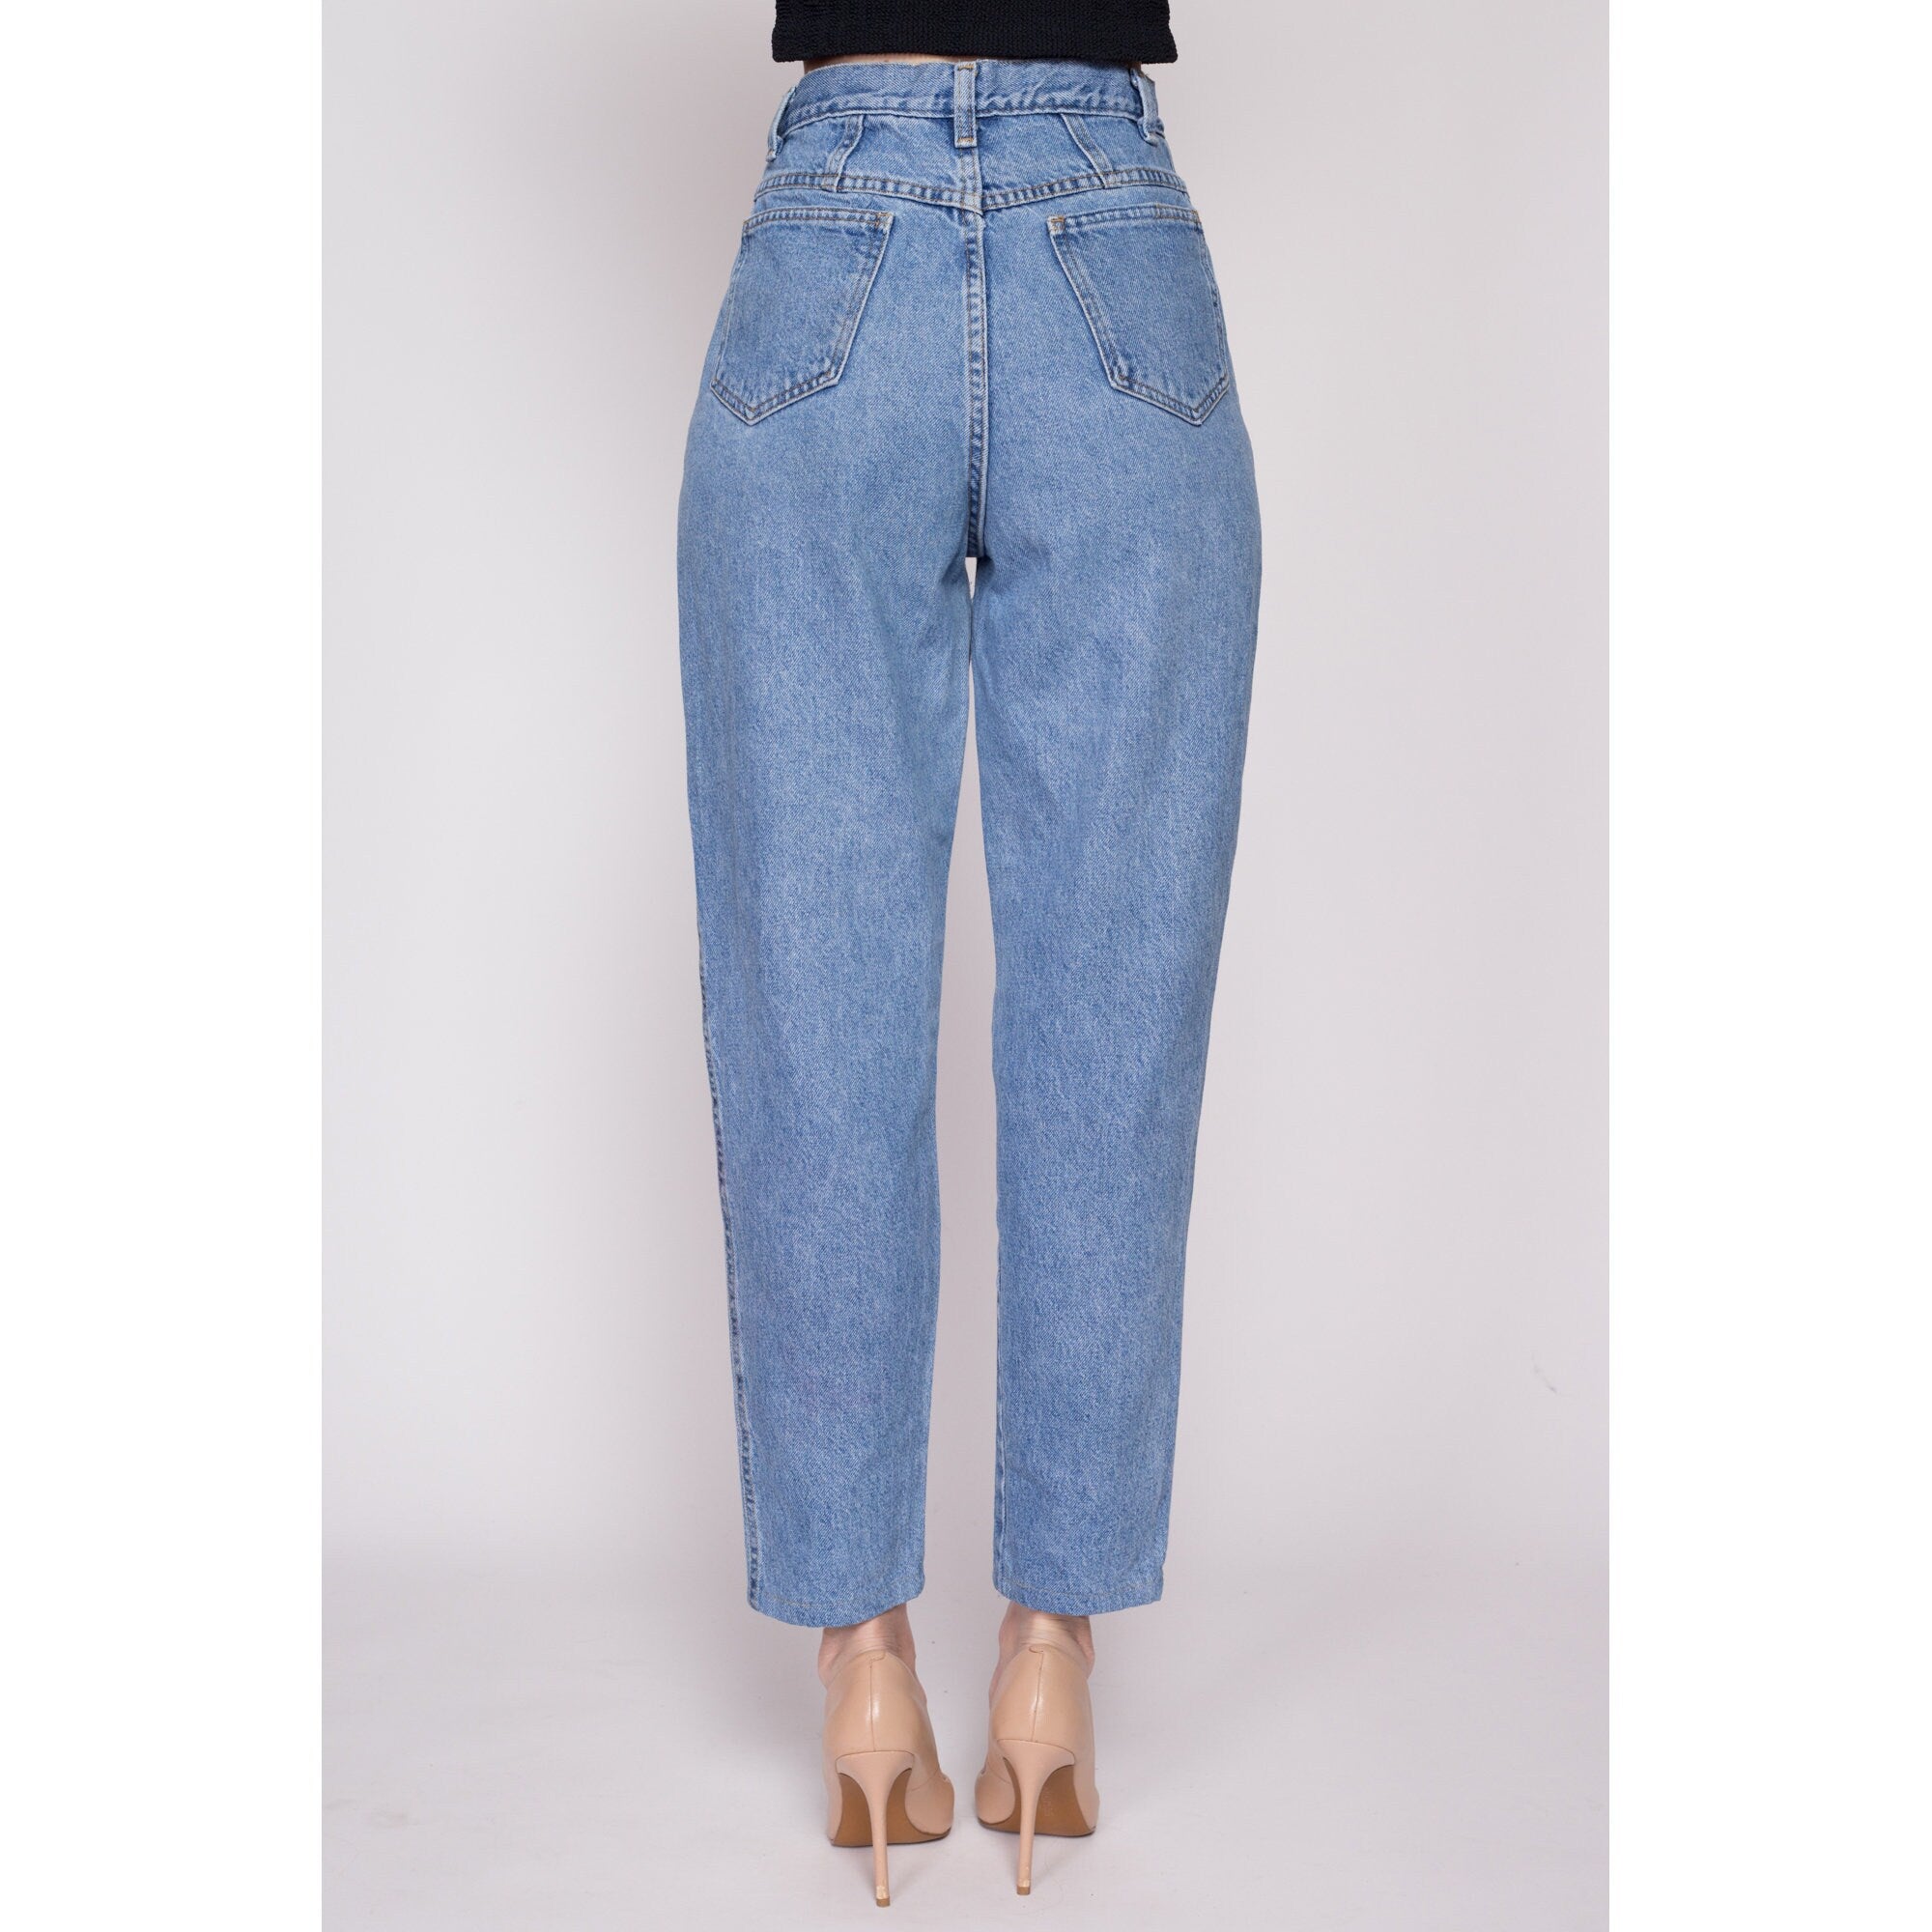 Small 90s High Waisted Mom Jeans 26